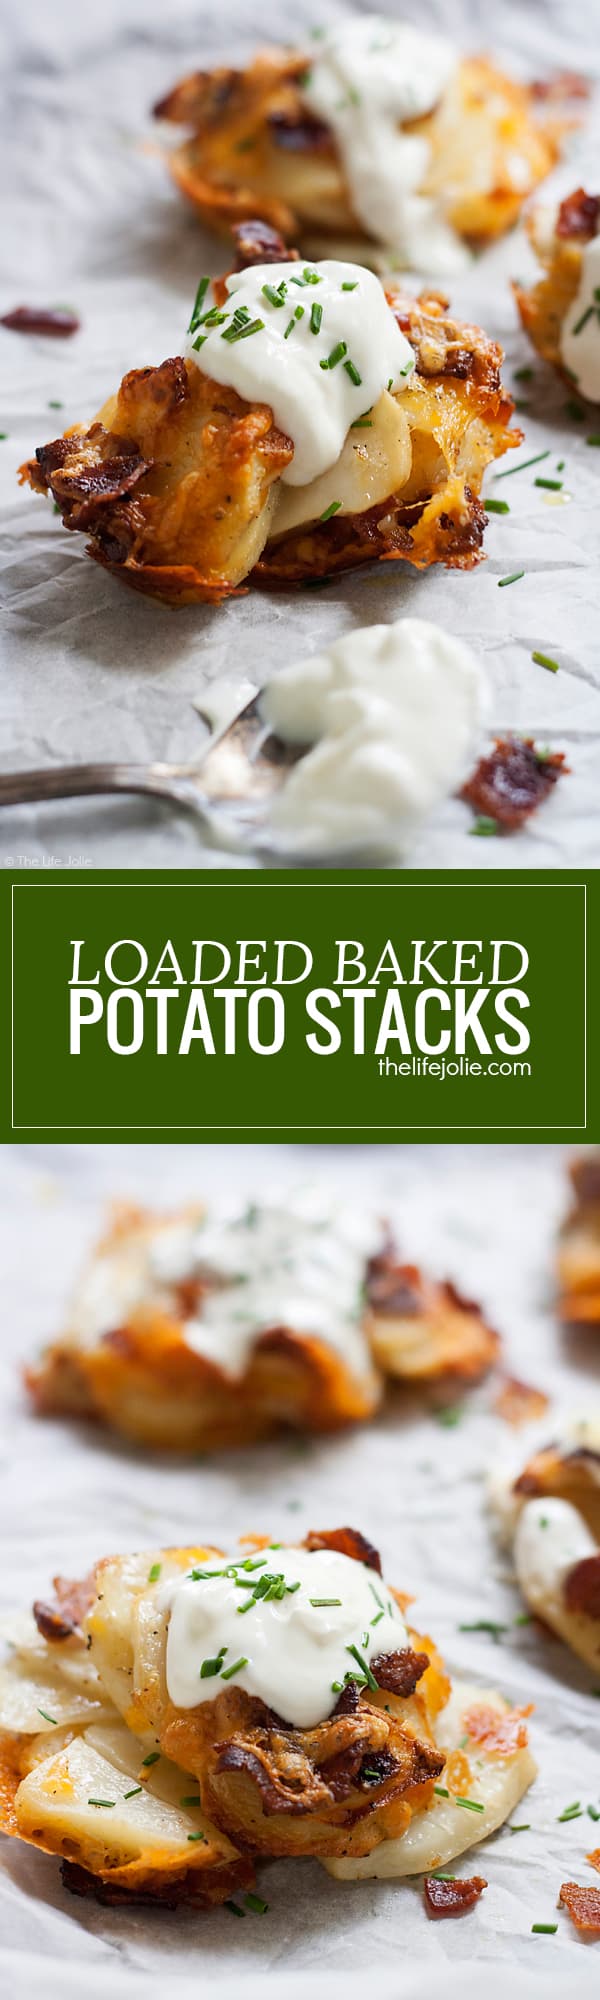 This Loaded Baked Potato Stacks recipe is such an easy side dish for a weeknight dinner. Thin slices of potato, seasoned and stacked in the cups of a muffin tin and baked in the oven; these are a tasty addition to any meal and they also make a delicious game day appetizer!